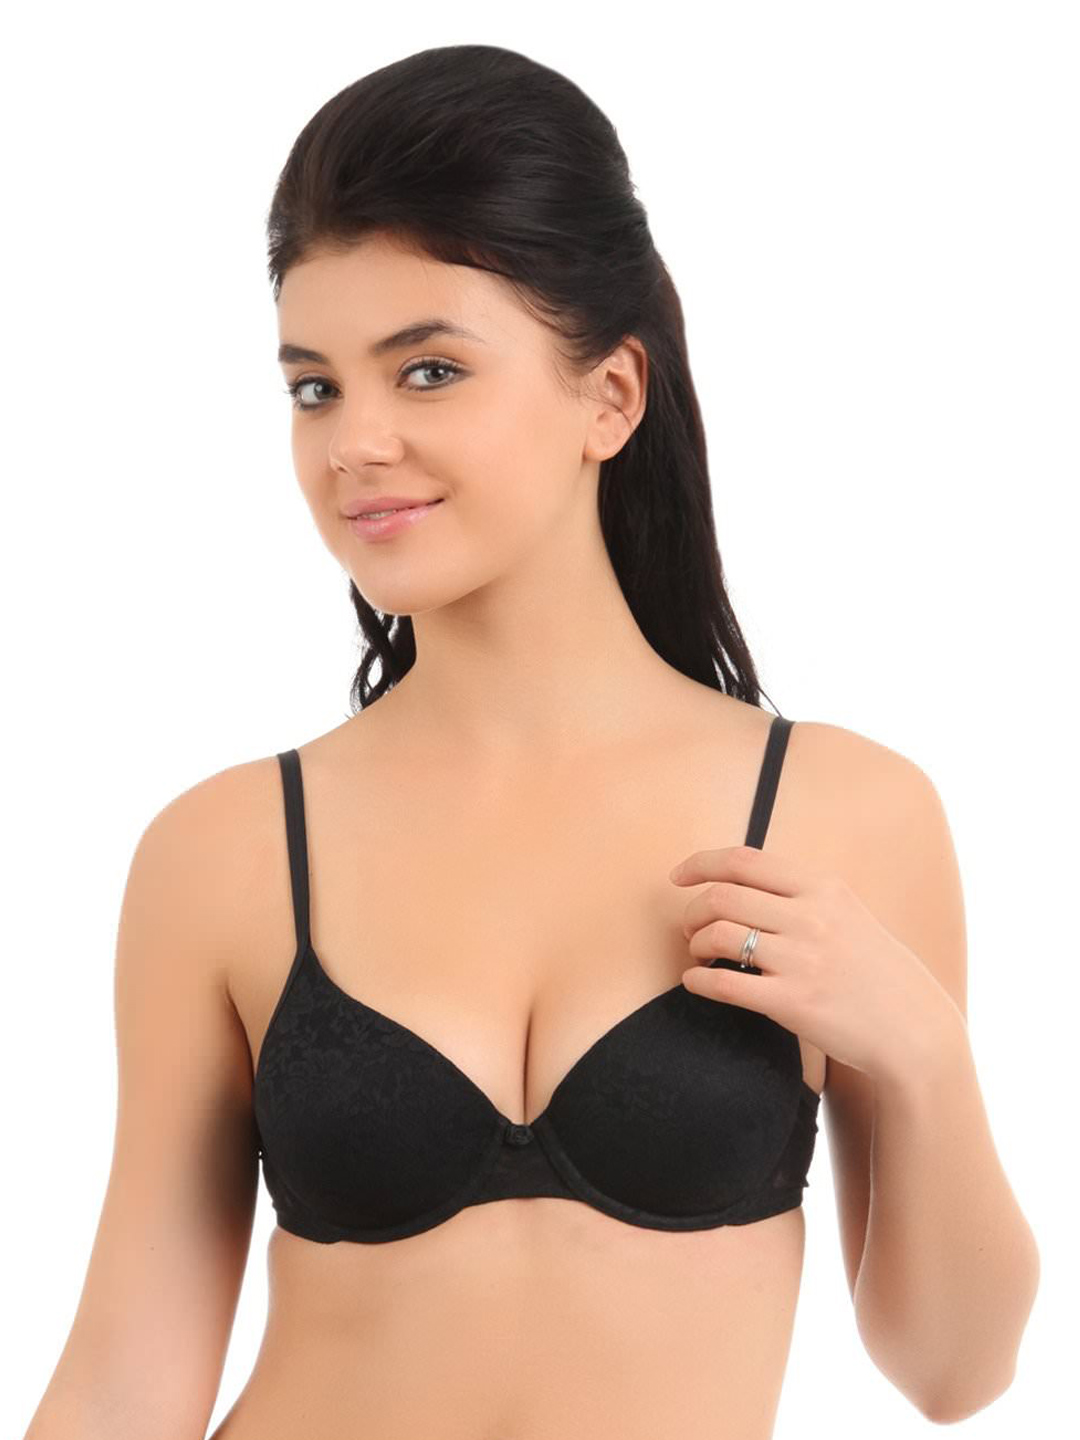 Amante Black T-Shirt Bra Price in India, Full Specifications & Offers